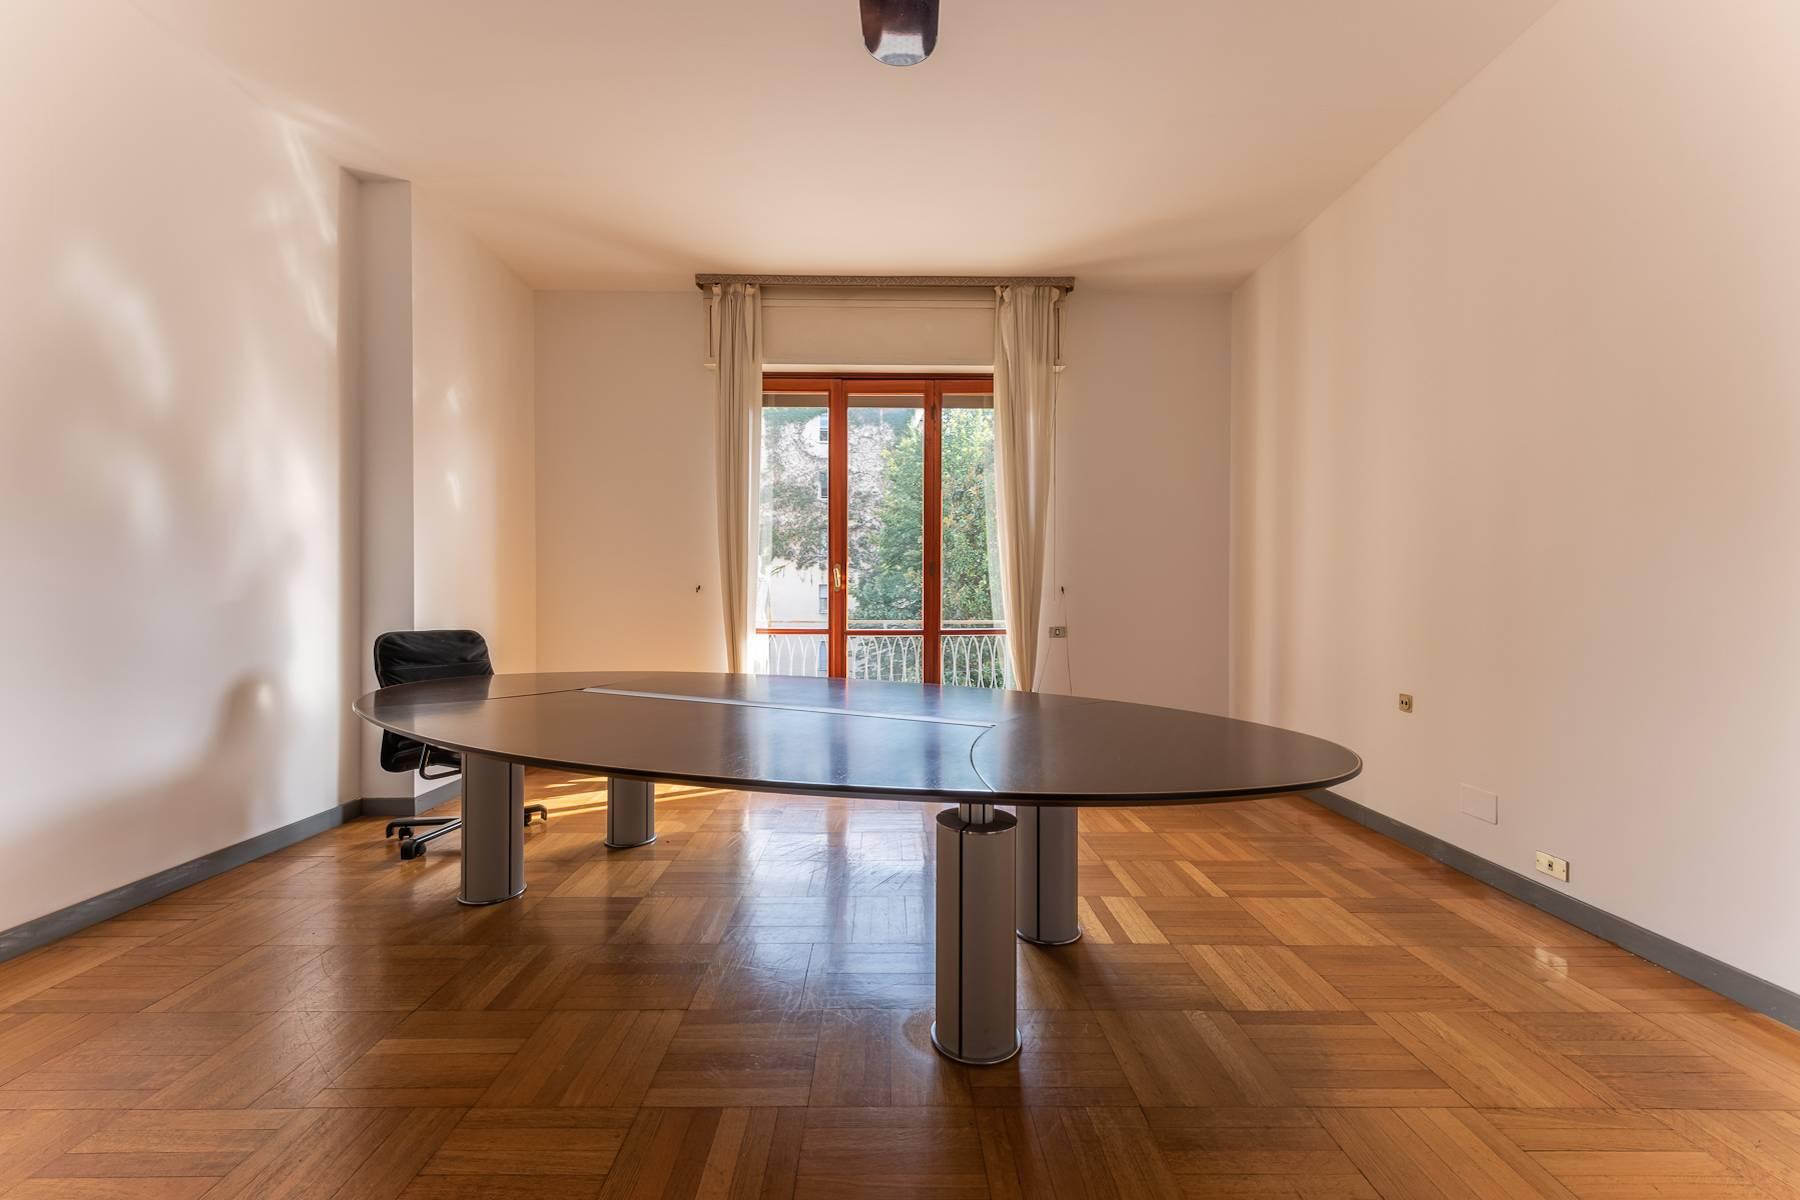 Office of about 200 square meters for rent in the Court area - 14